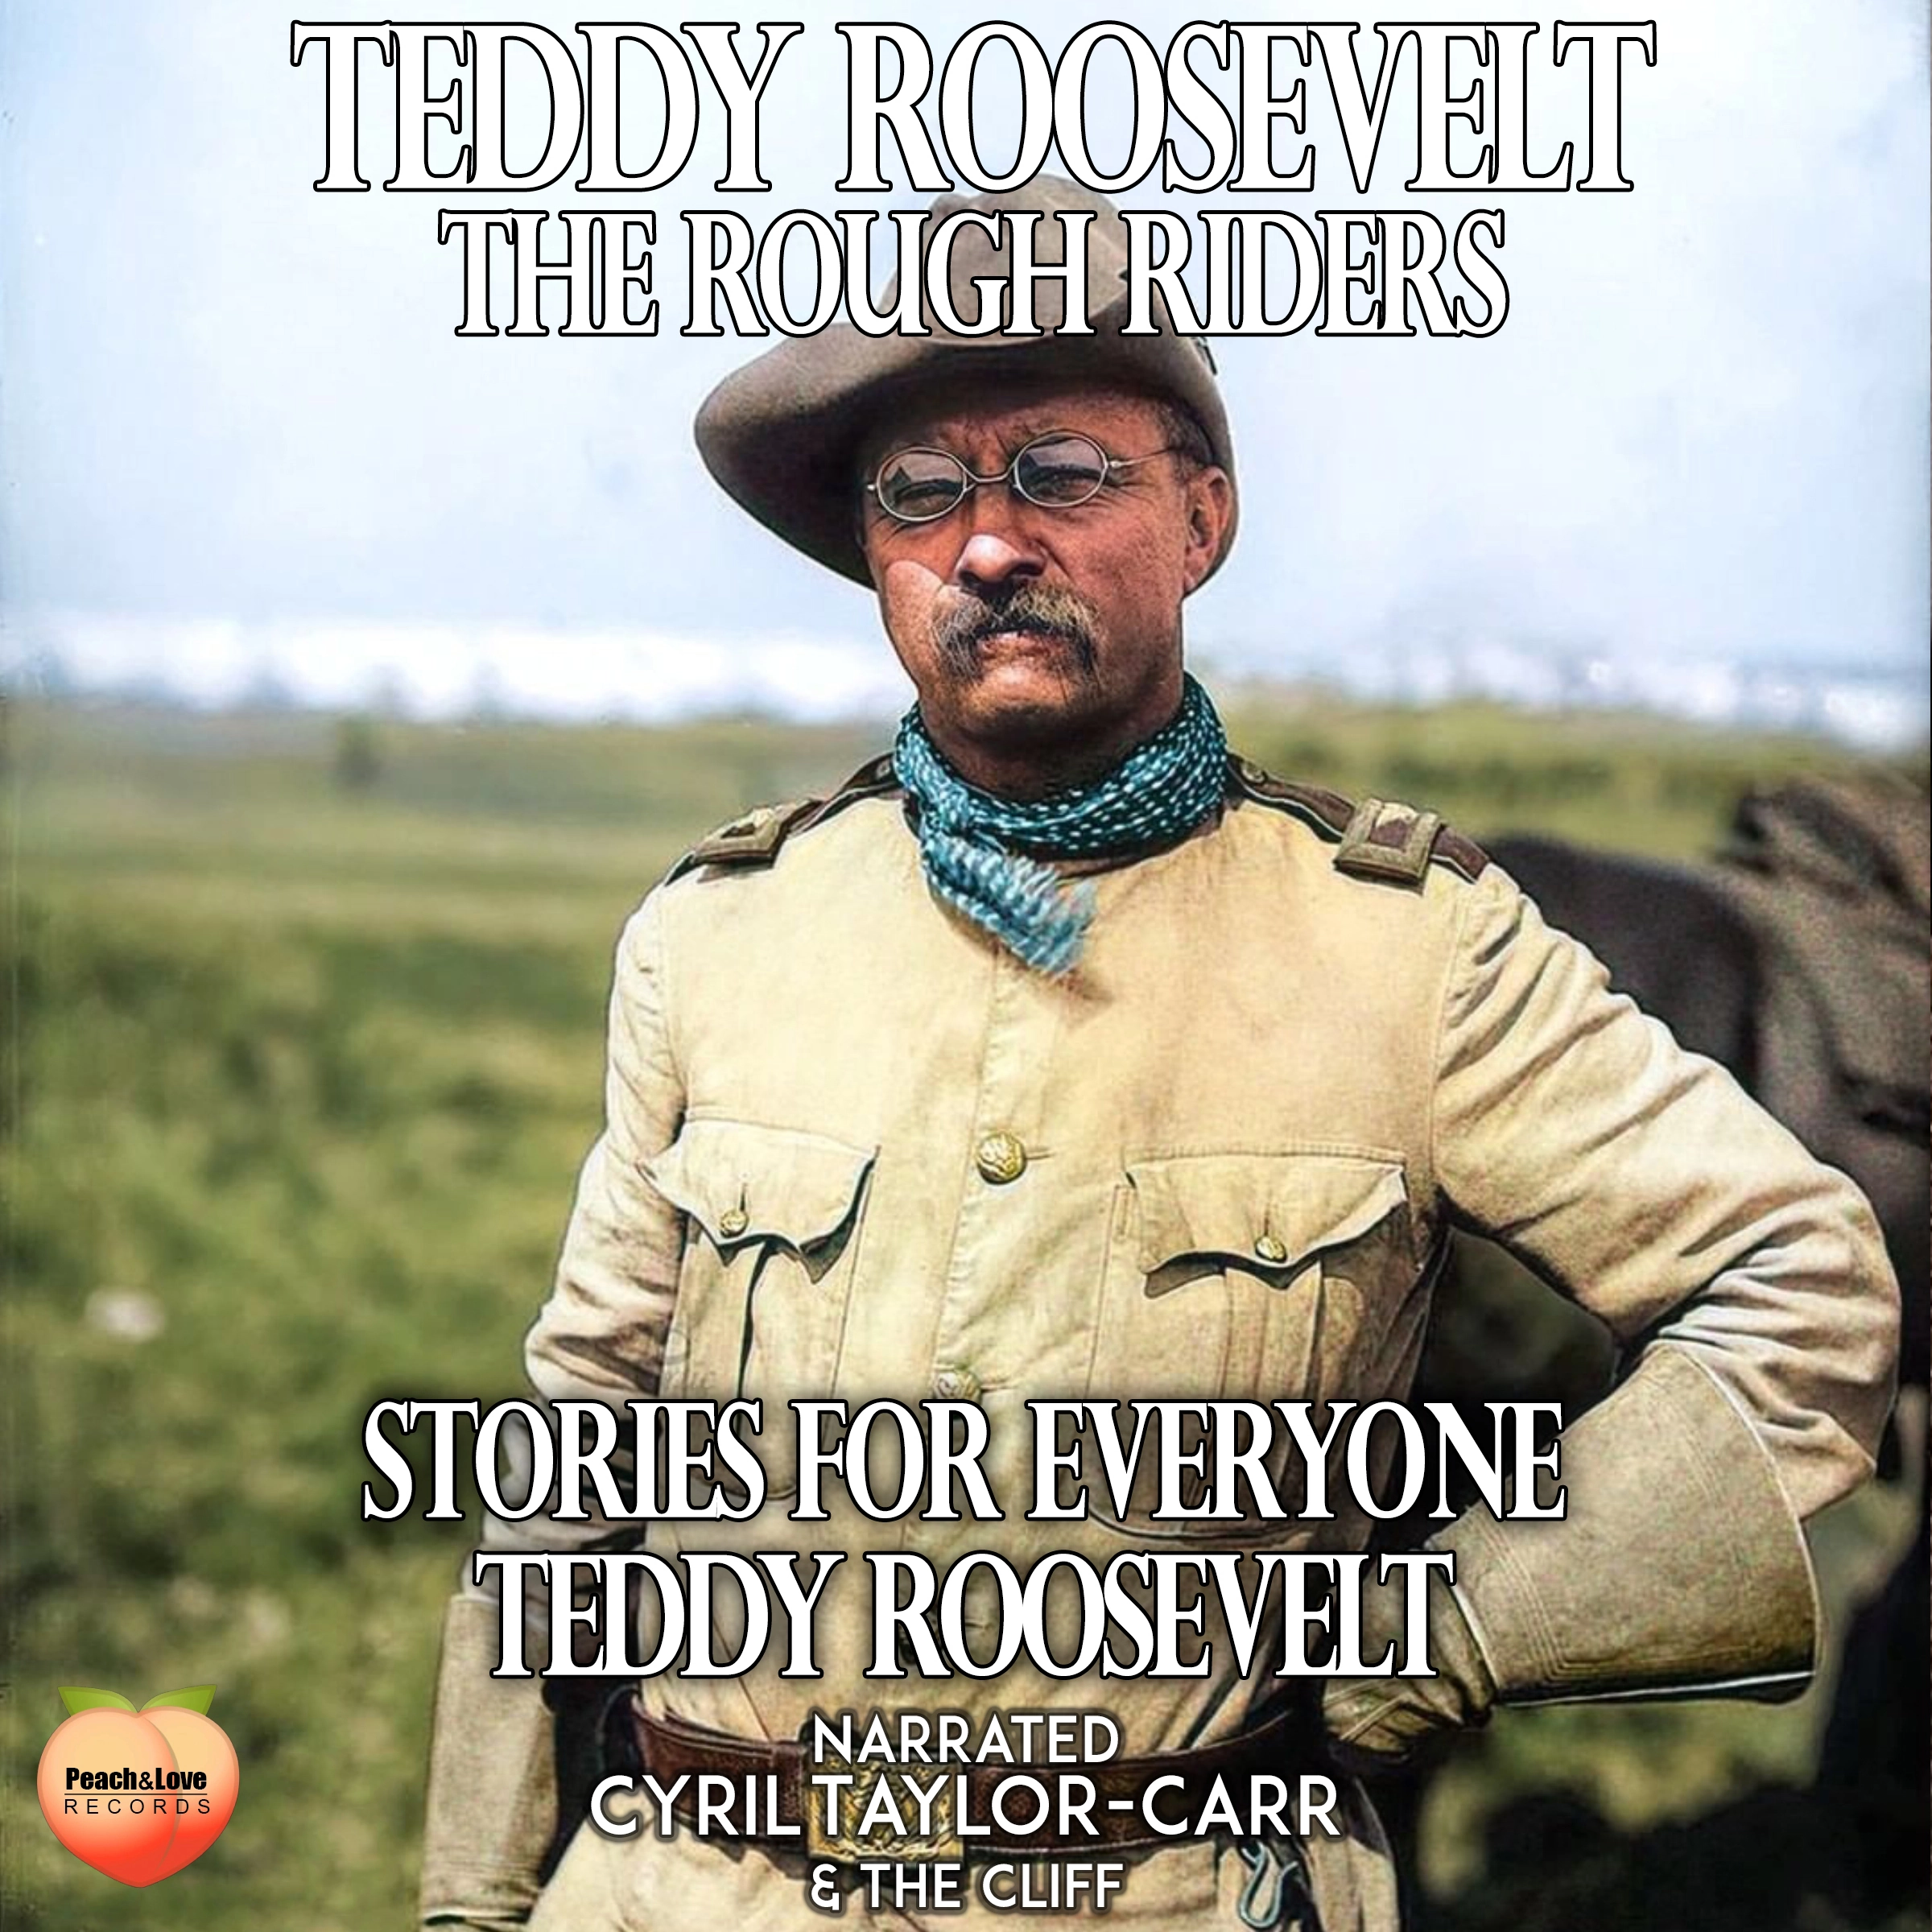 Teddy Roosevelt & The Rough Riders by Teddy Roosevelt Audiobook